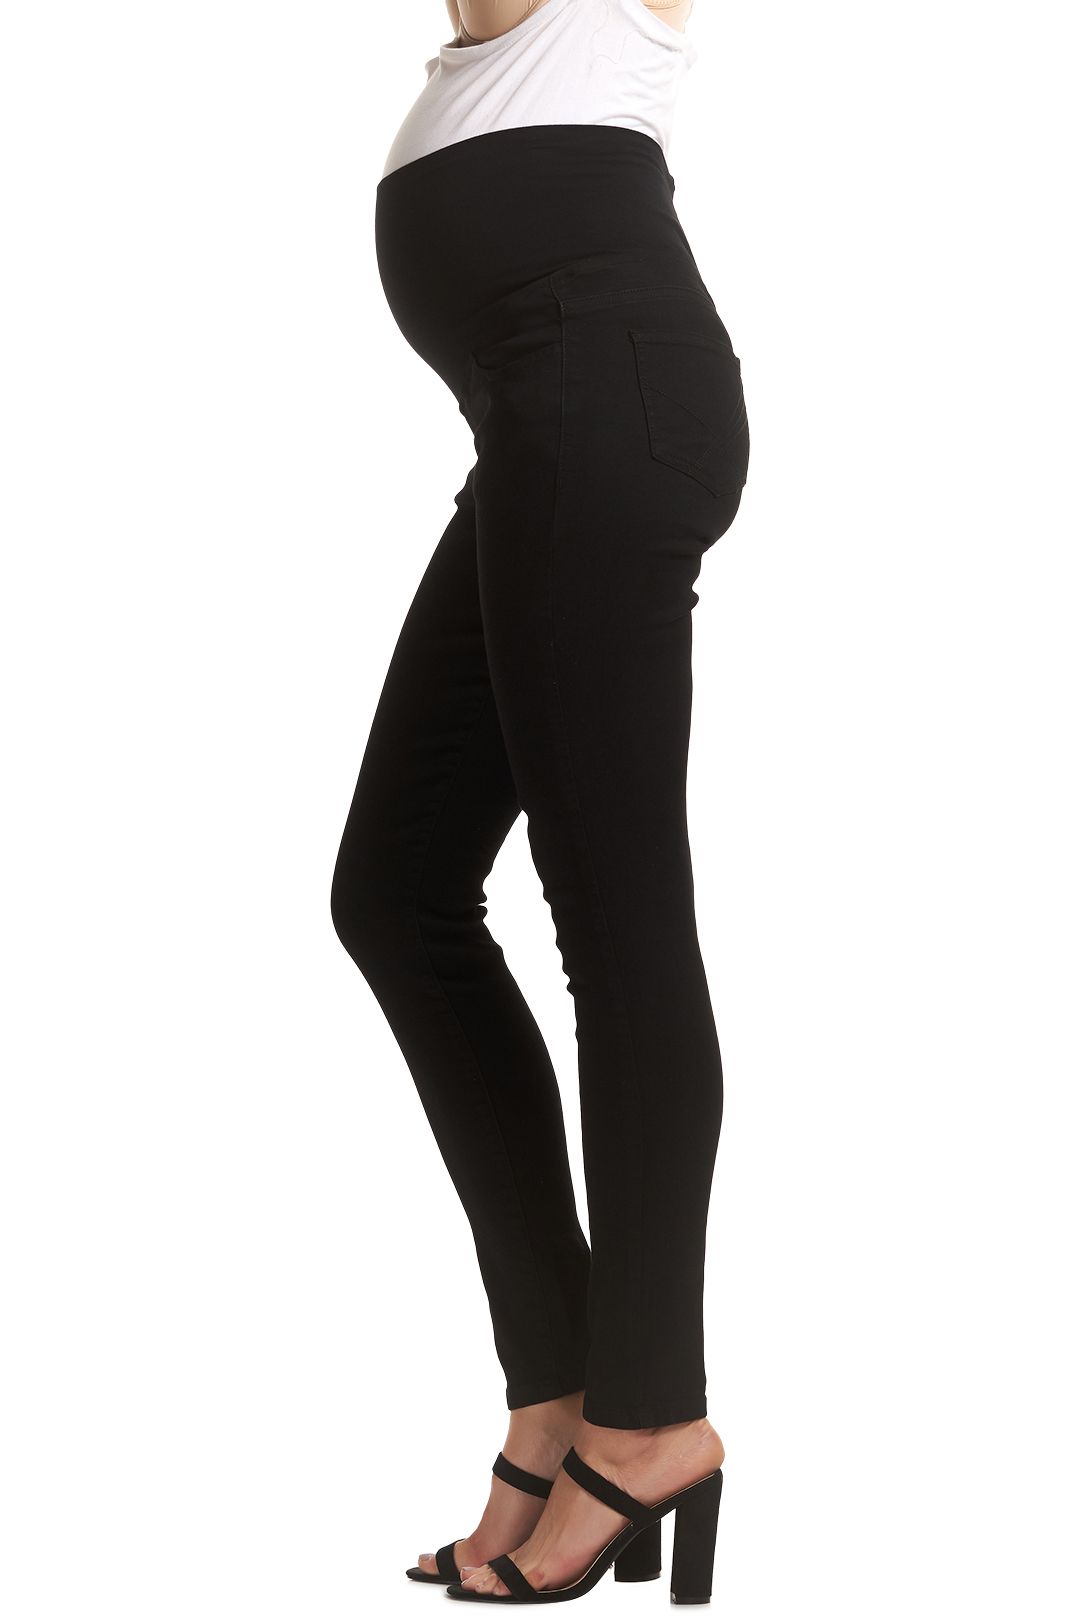 Soon-Maternity-Margot-Overbelly-Jeans-Black-Product